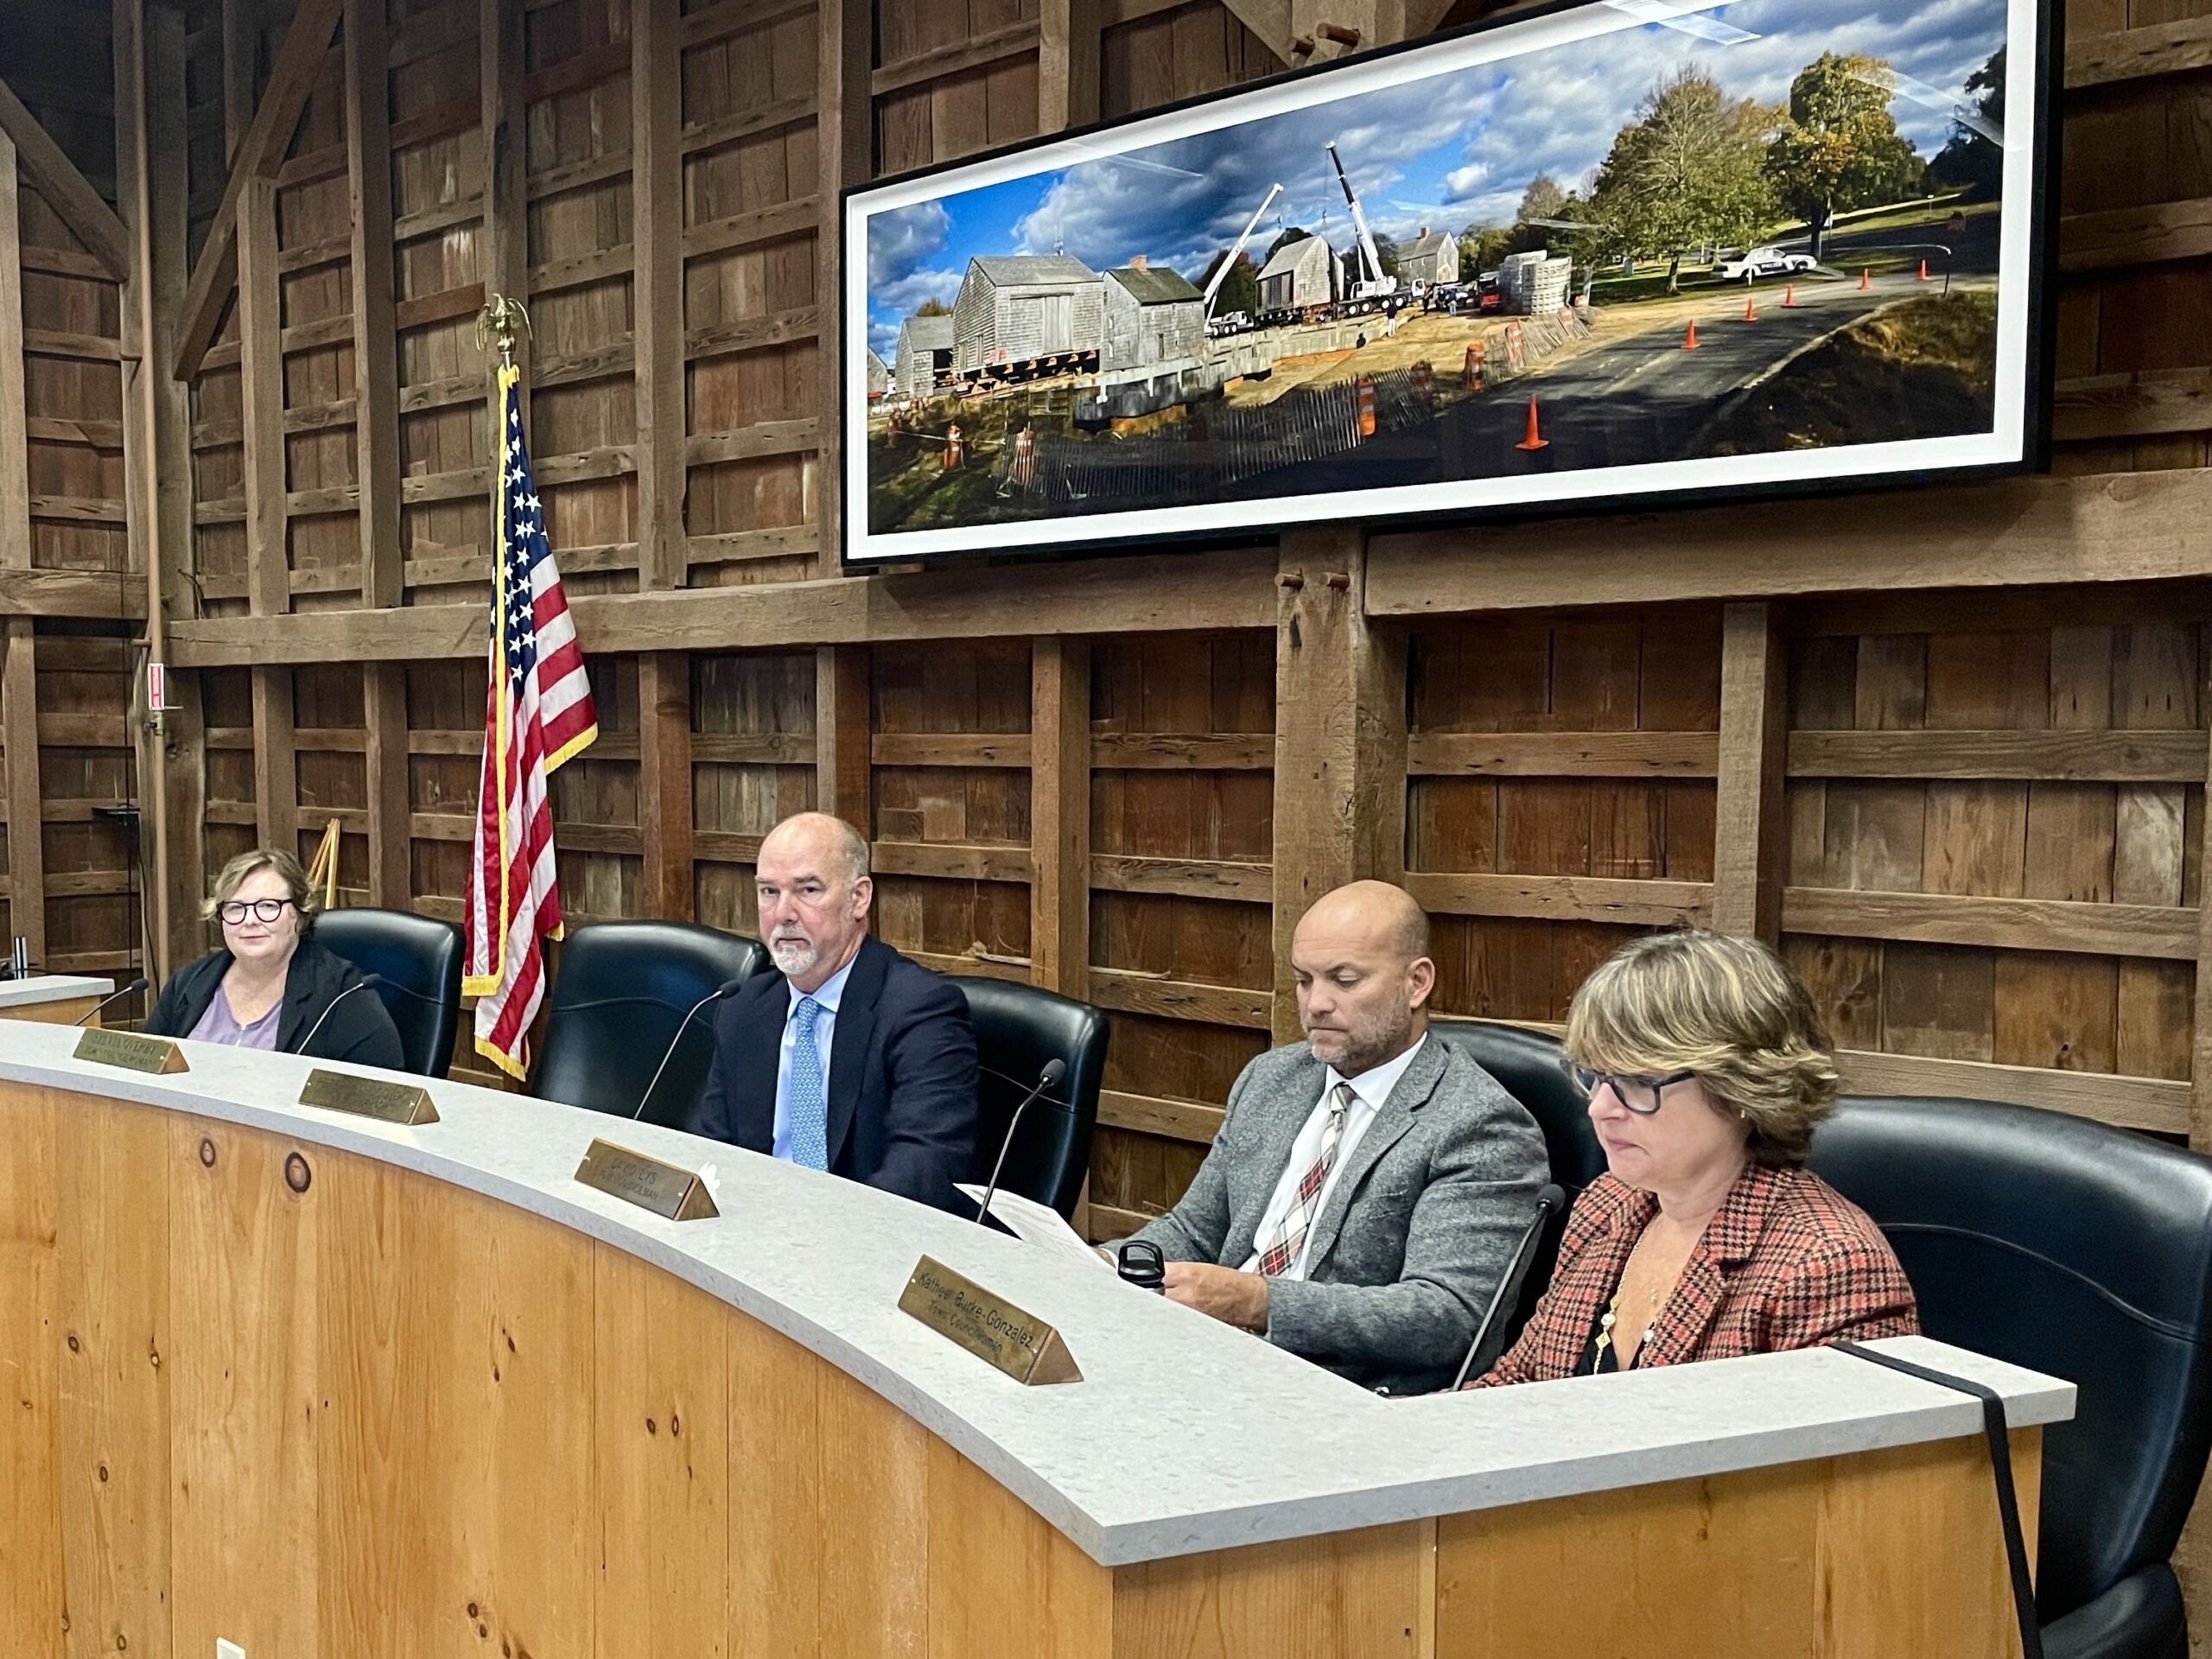 Supervisor Peter Van Scoyoc, center, and the East Hampton Town Board have proposed a large spending hike that pours money into raises for town employees facing inflation and soaring costs of living.